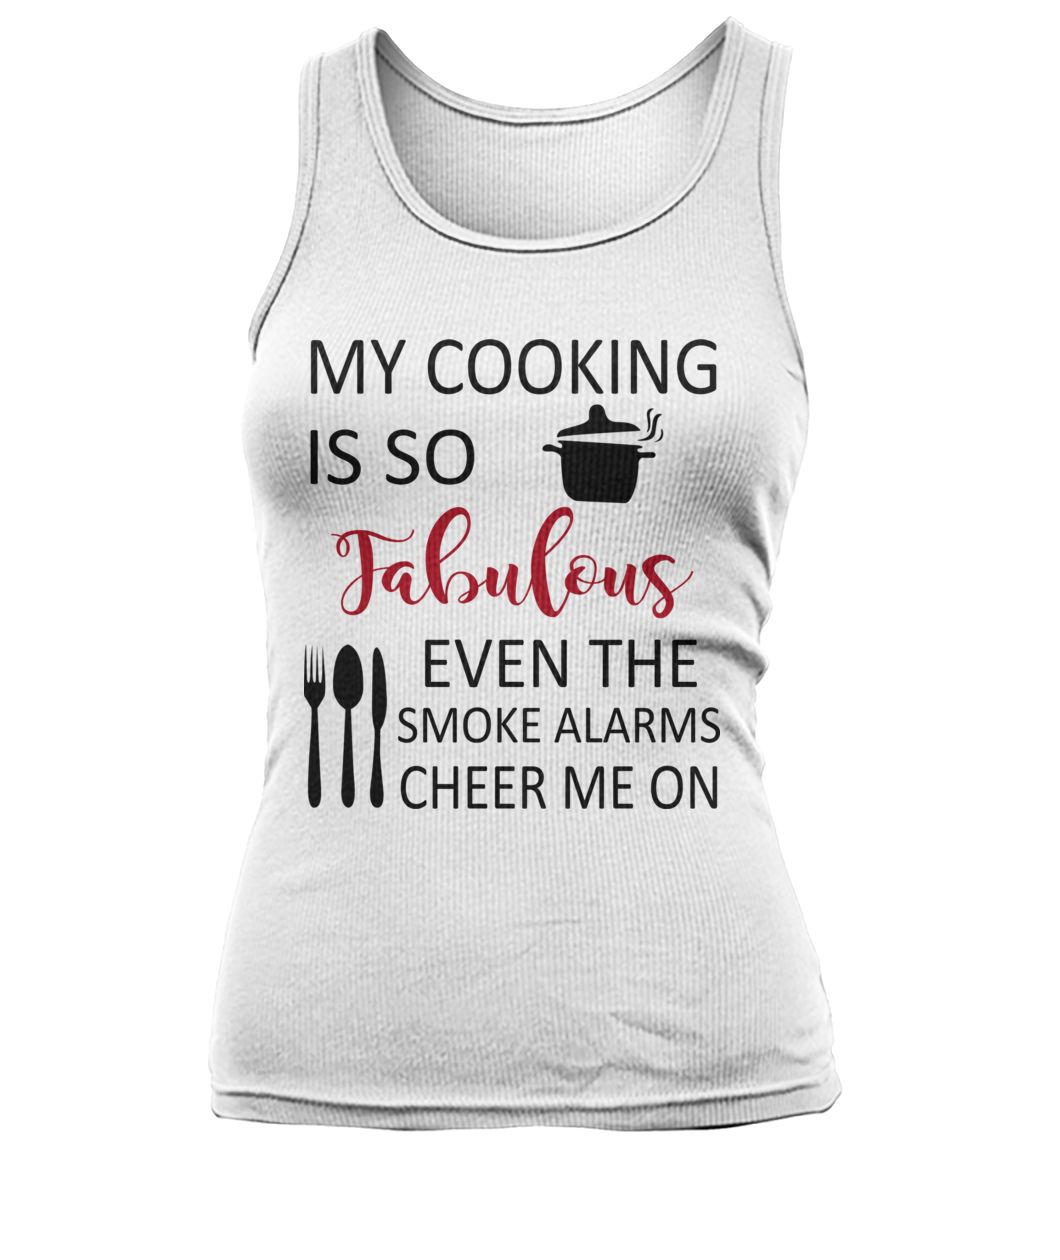 My cooking is so fabulous even the smoke alarms cheer me on women's tank top